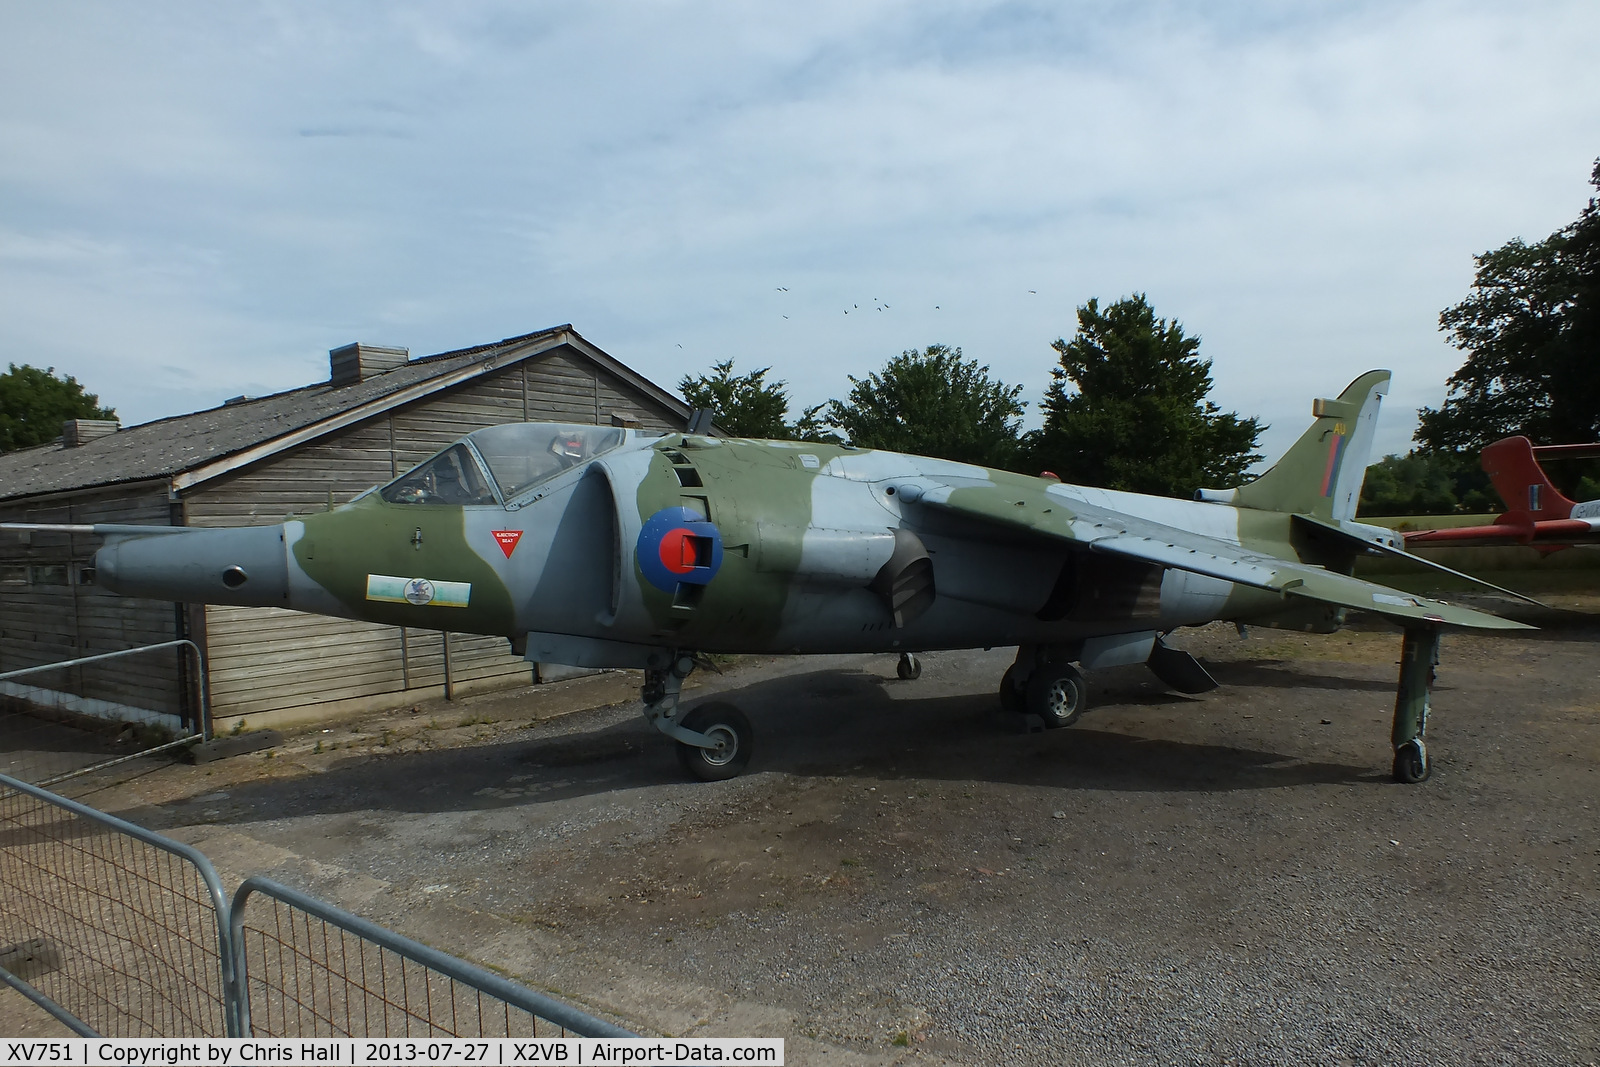 XV751, 1969 Hawker Siddeley Harrier GR.3 C/N 712014, displayed at the Gatwick Aviation Museum